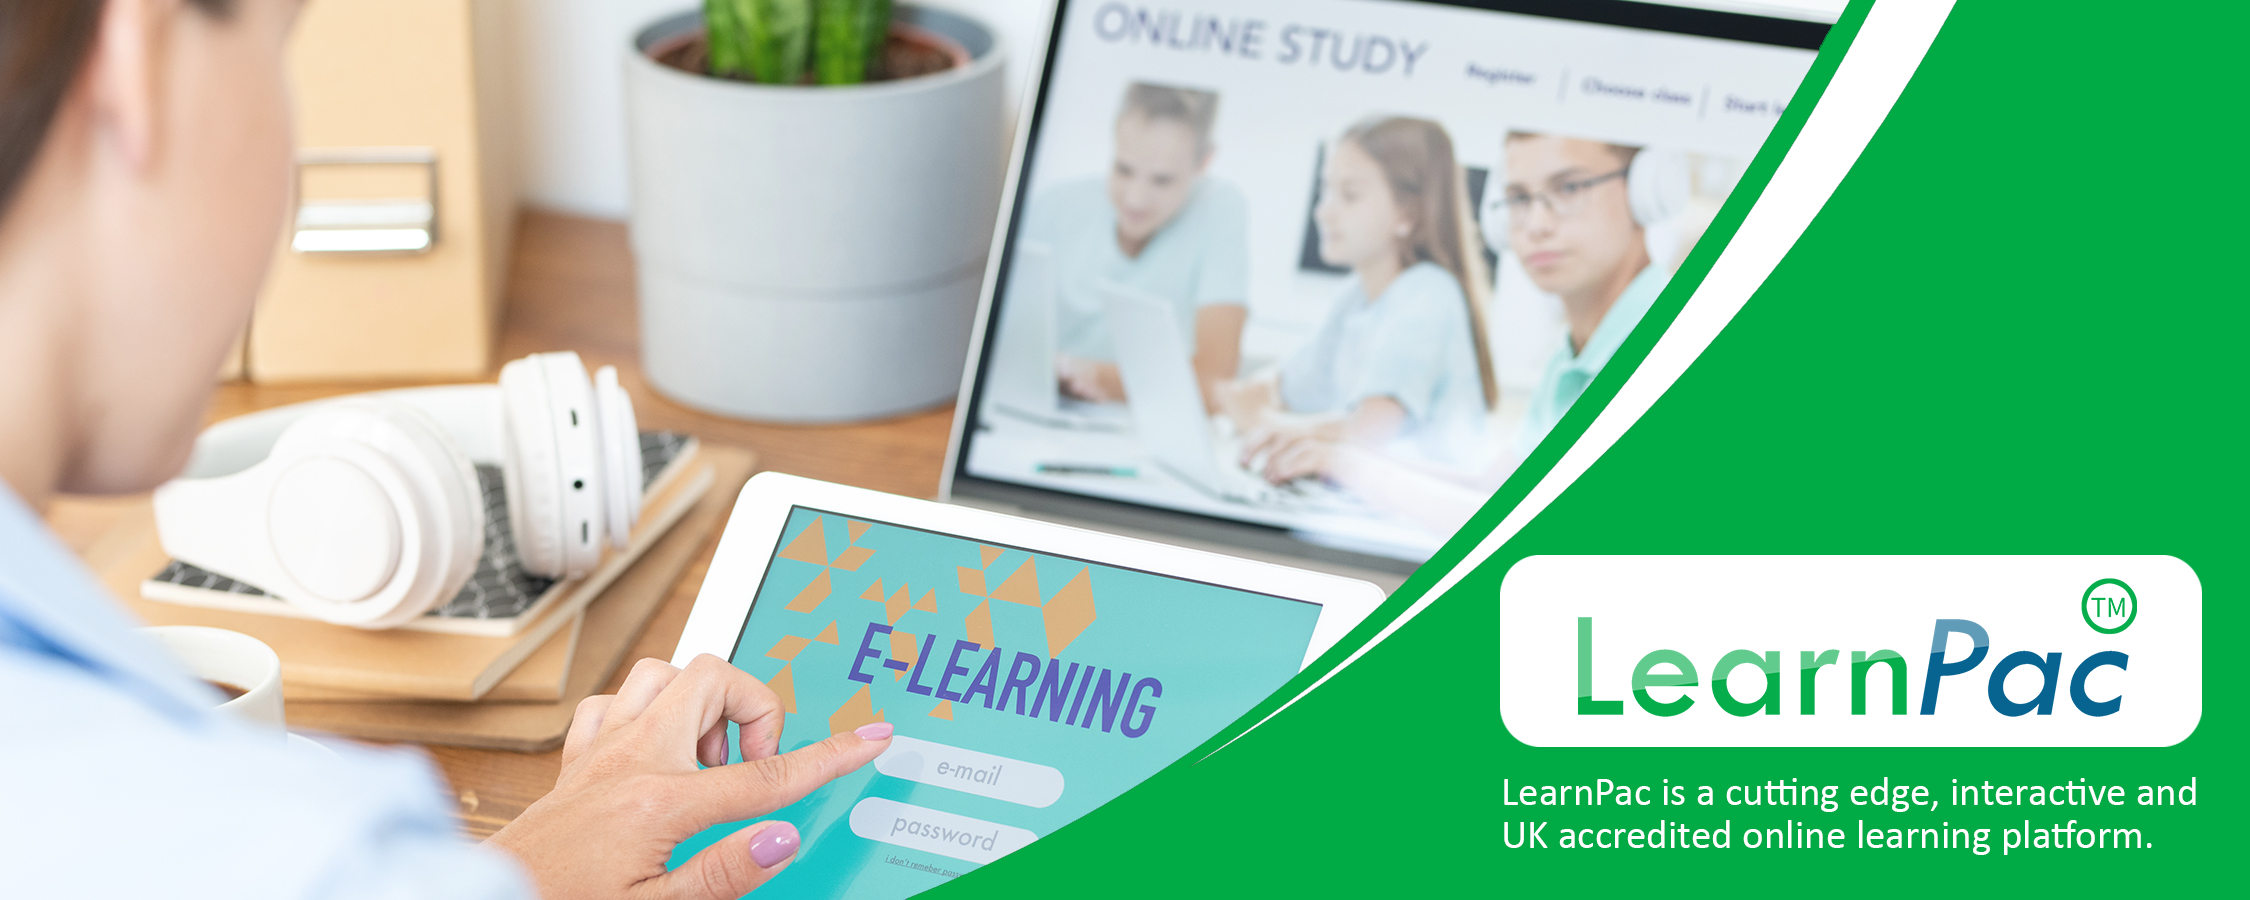 Health and Safety in the Early Years (EYFS) - E-Learning Courses - LearnPac Systems UK -